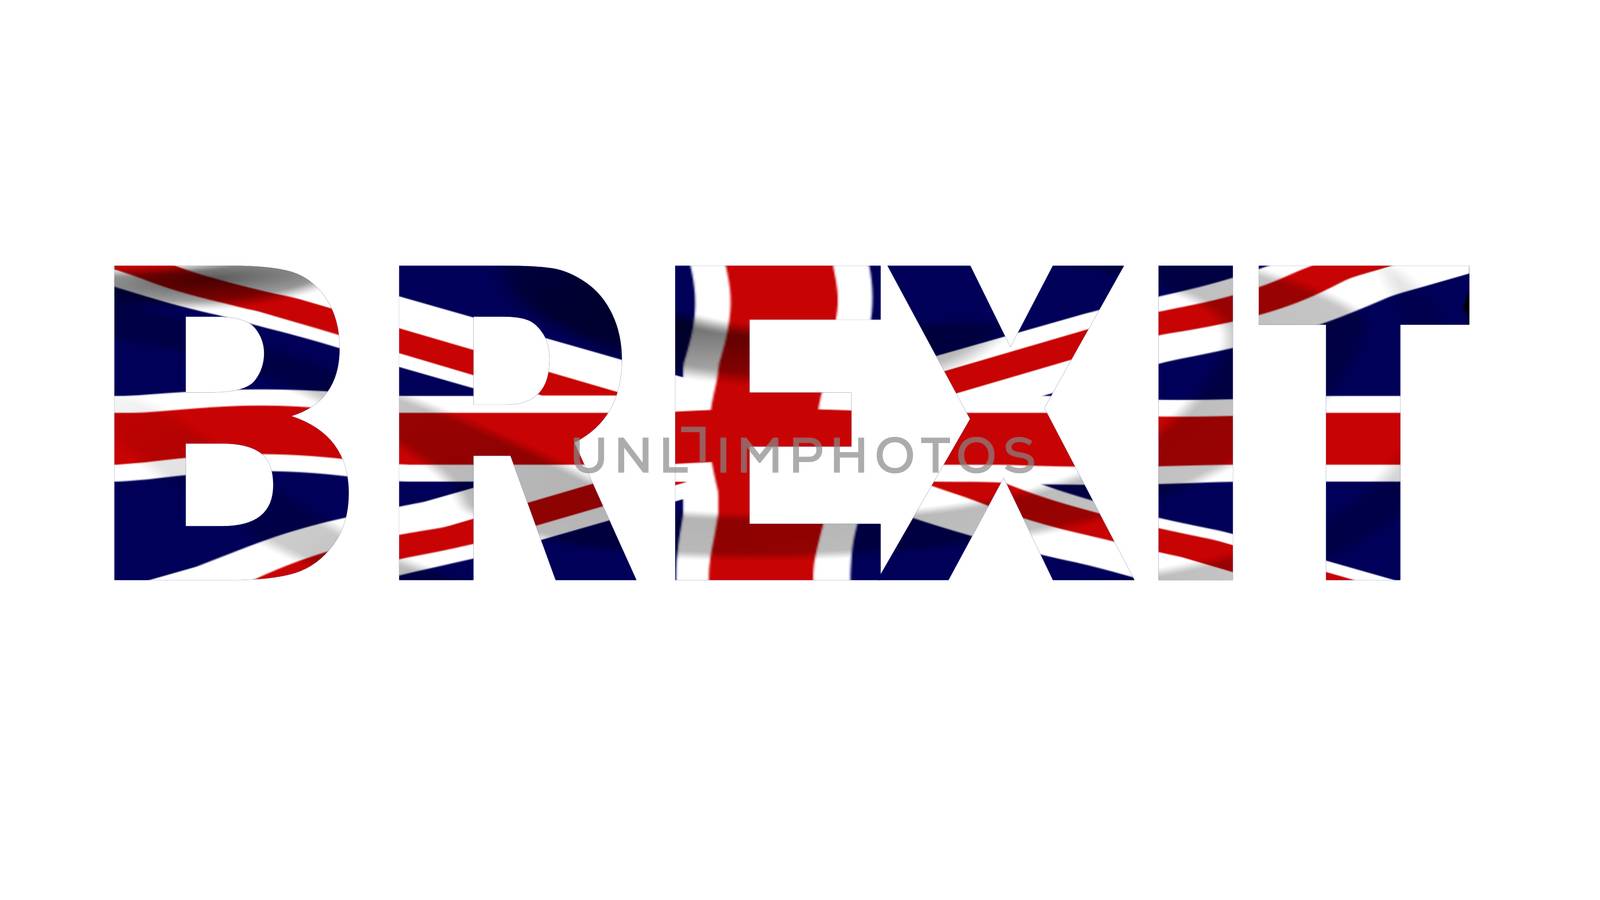 Brexit text in the colours of the Union Jack flag